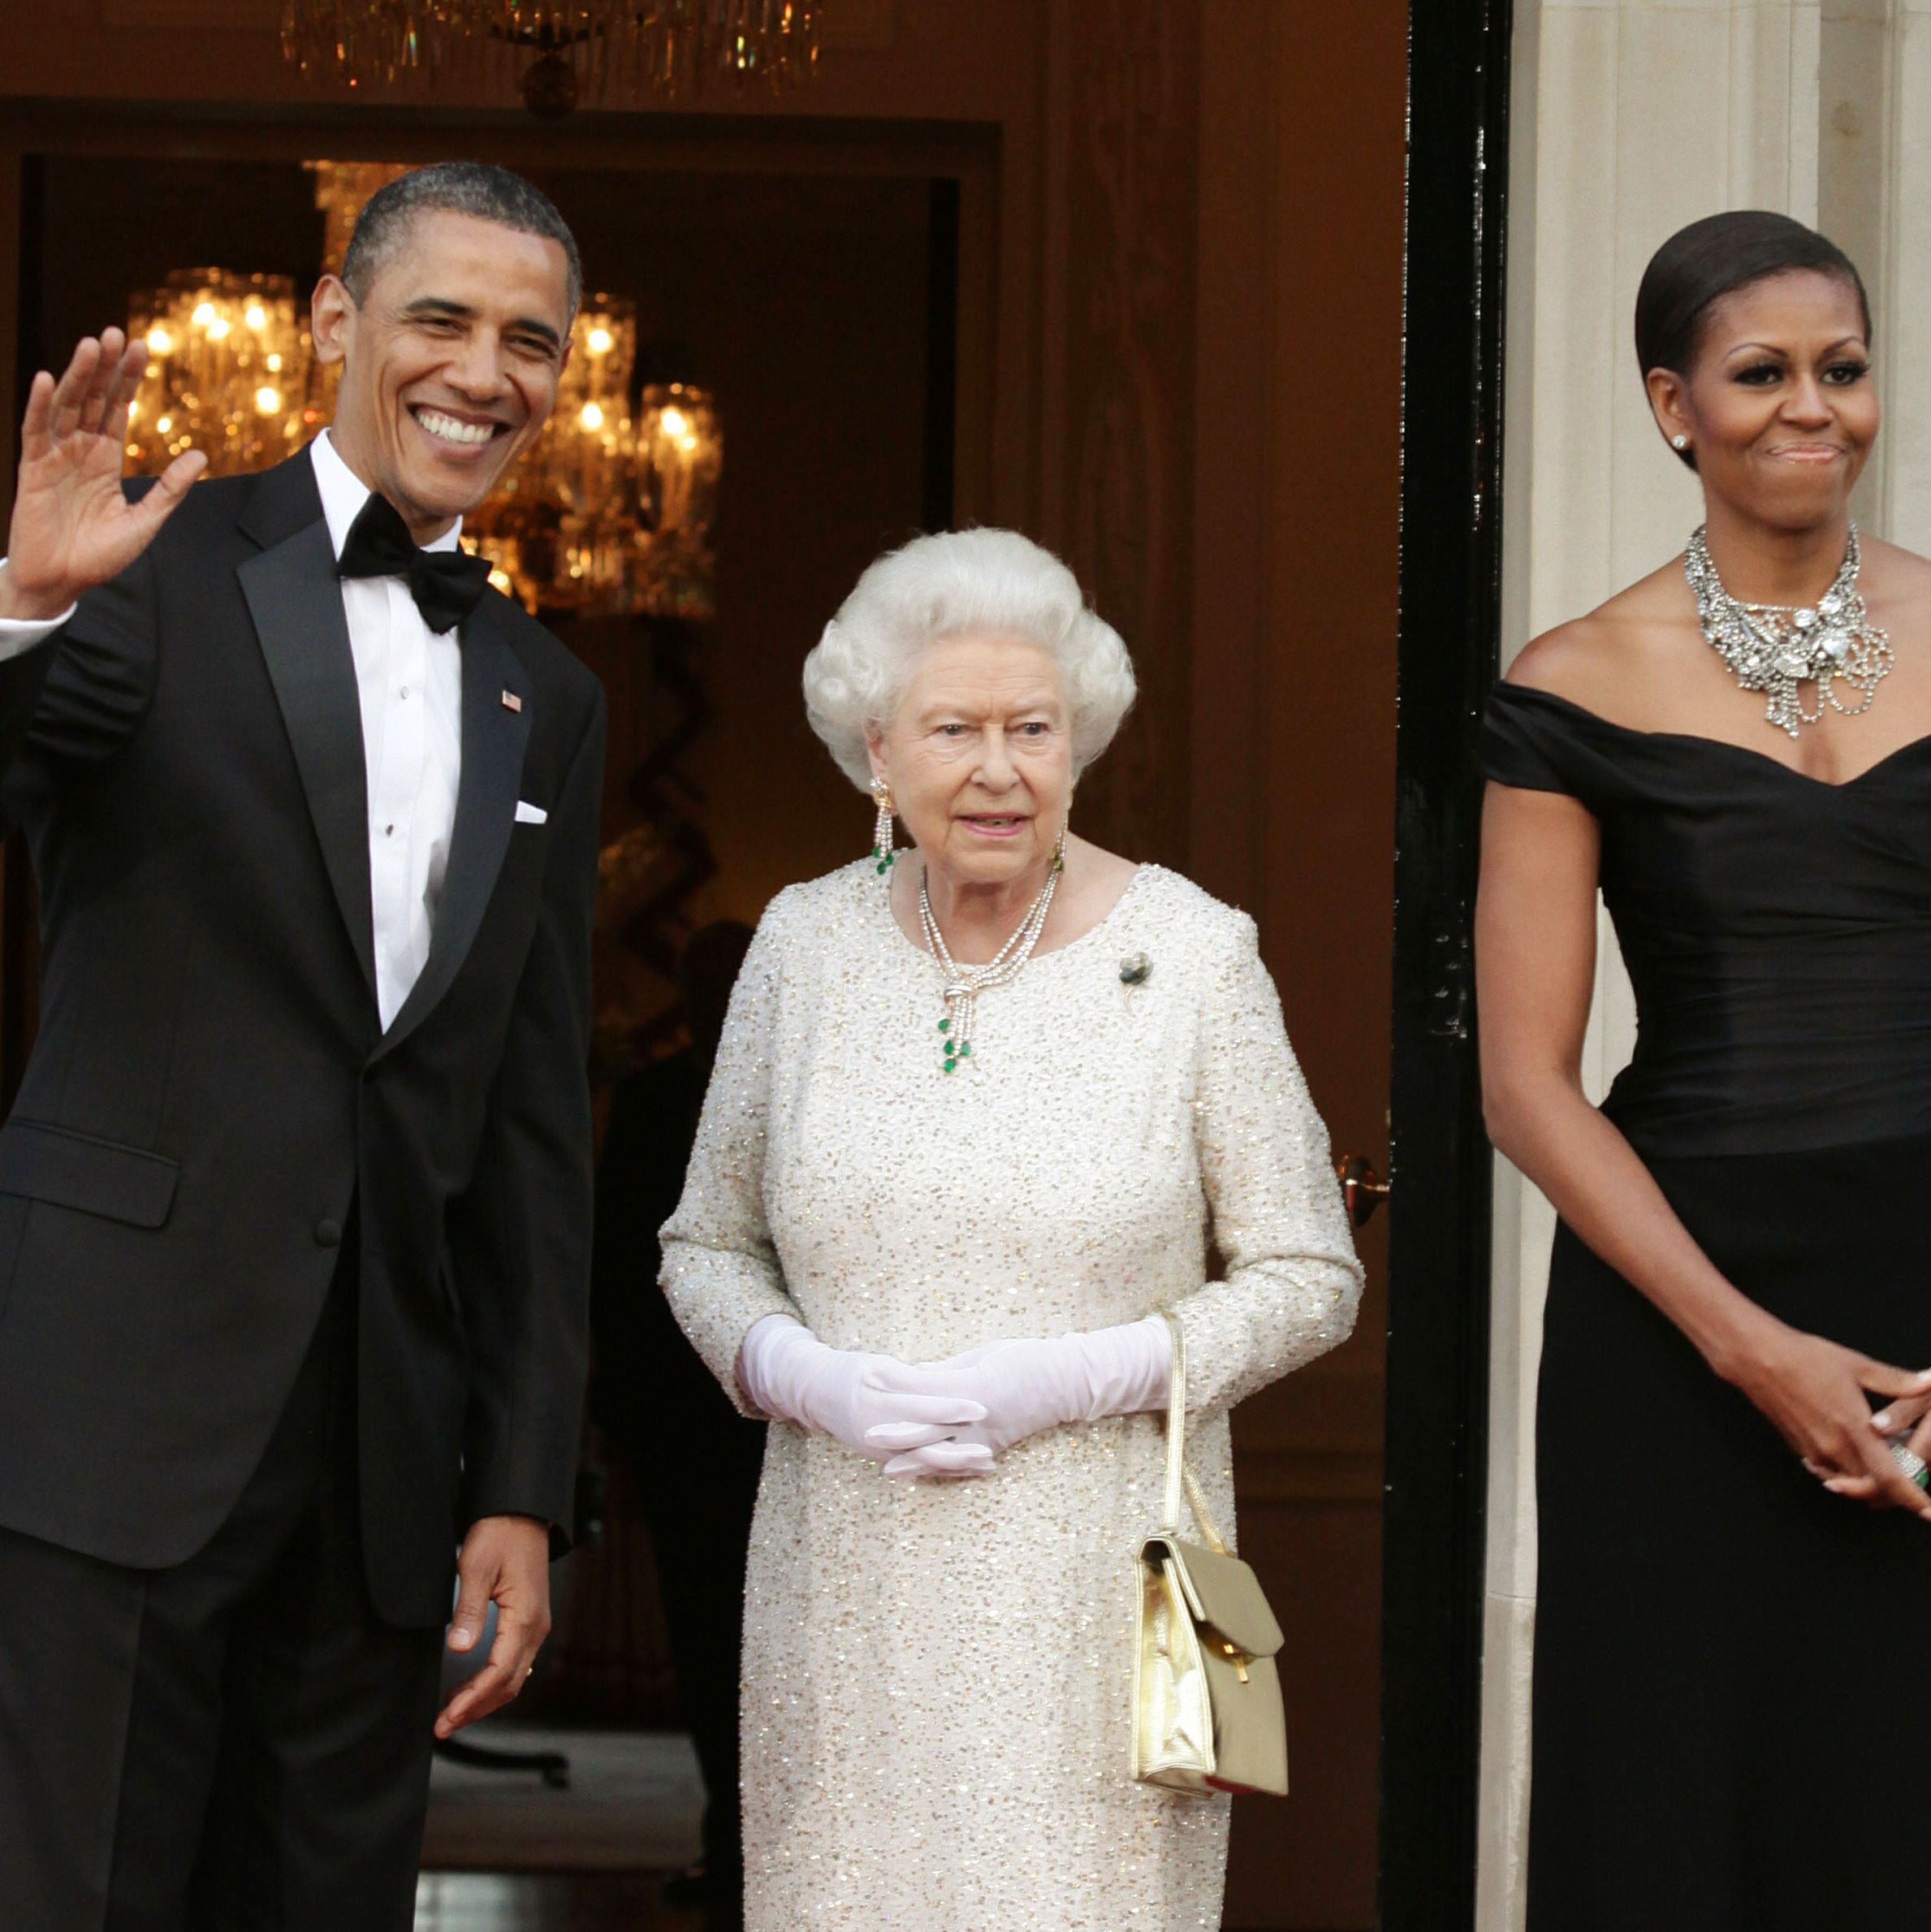 Michelle Obama Recalls How Queen Elizabeth Told Her Royal Protocol Is